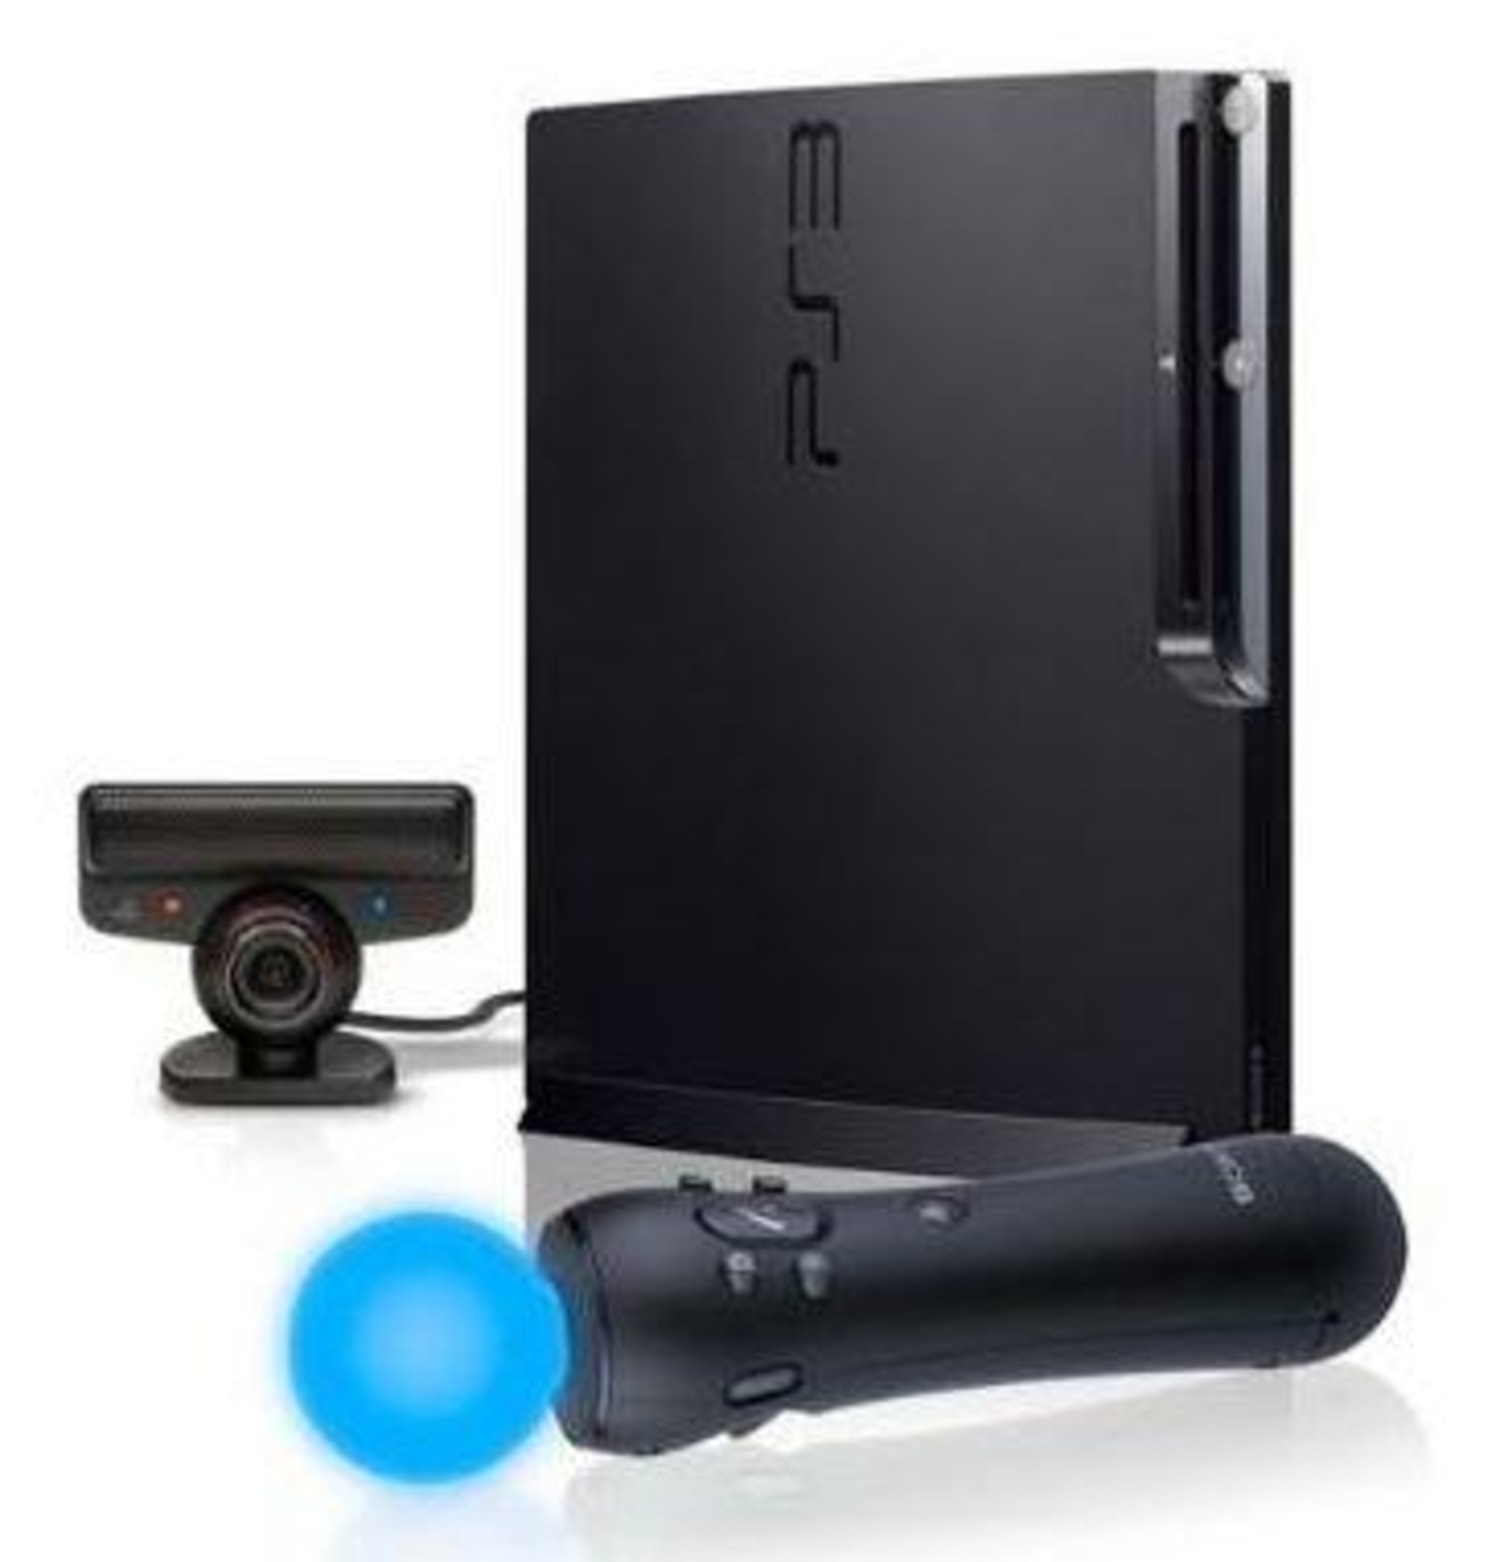 Retningslinier vedlægge Ristede A new PlayStation ... with Kinect controls?